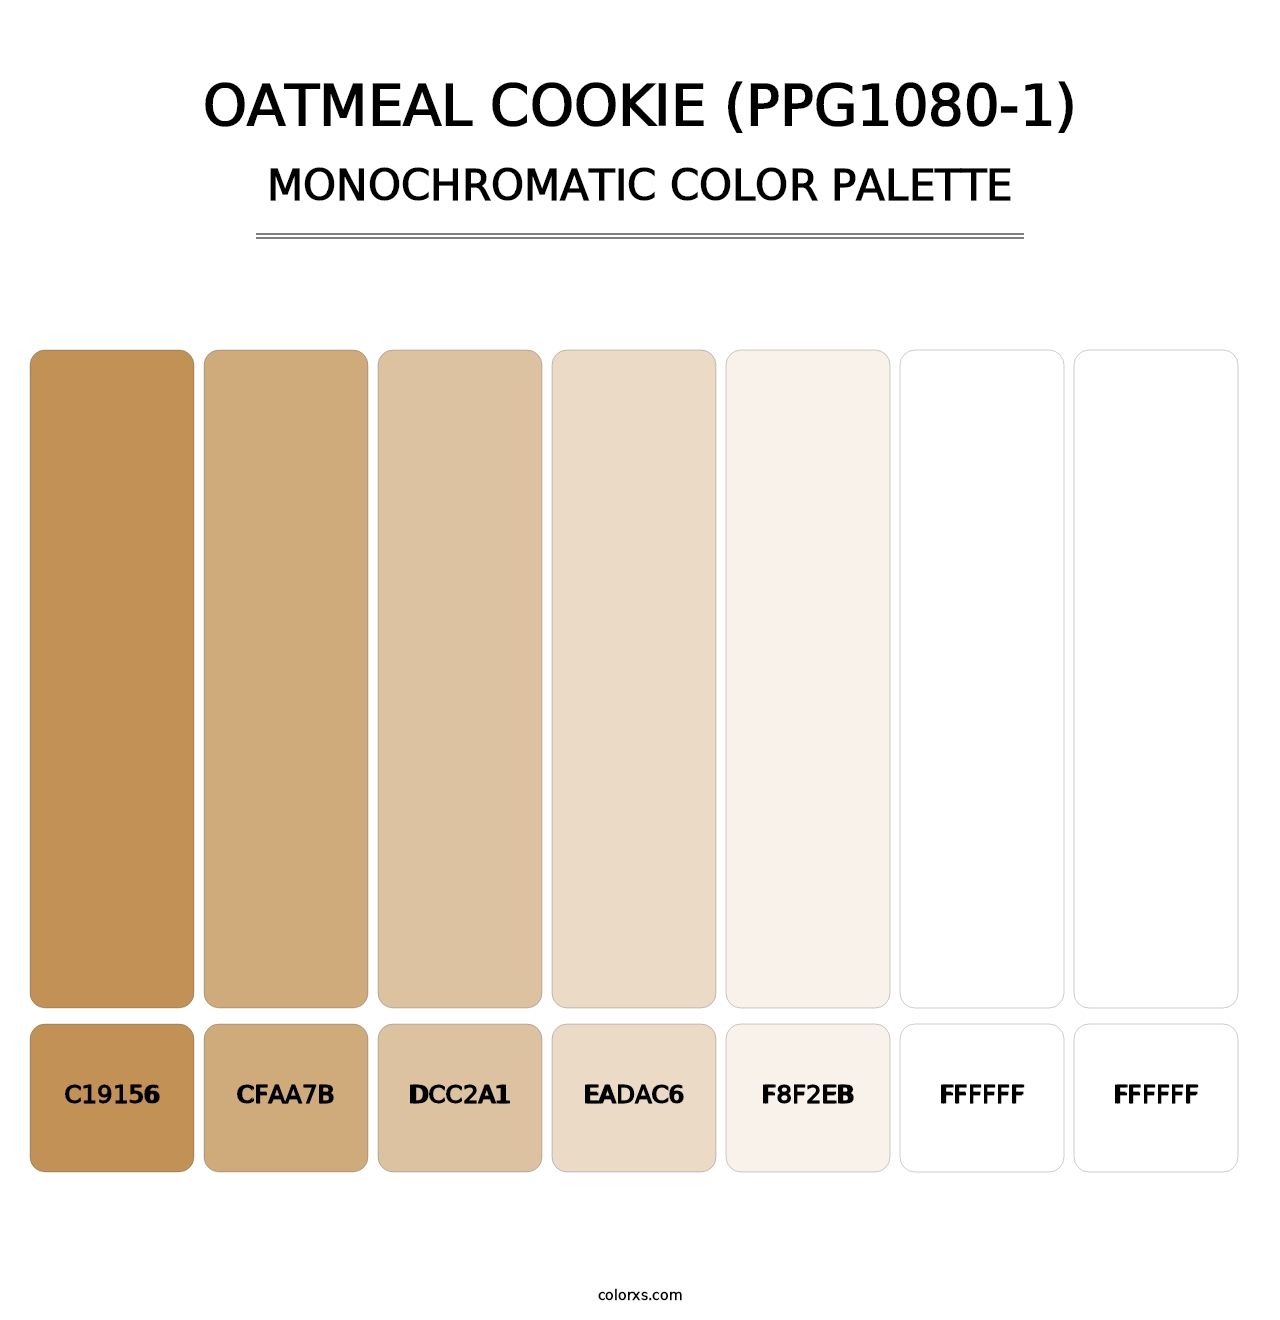 Oatmeal Cookie (PPG1080-1) - Monochromatic Color Palette